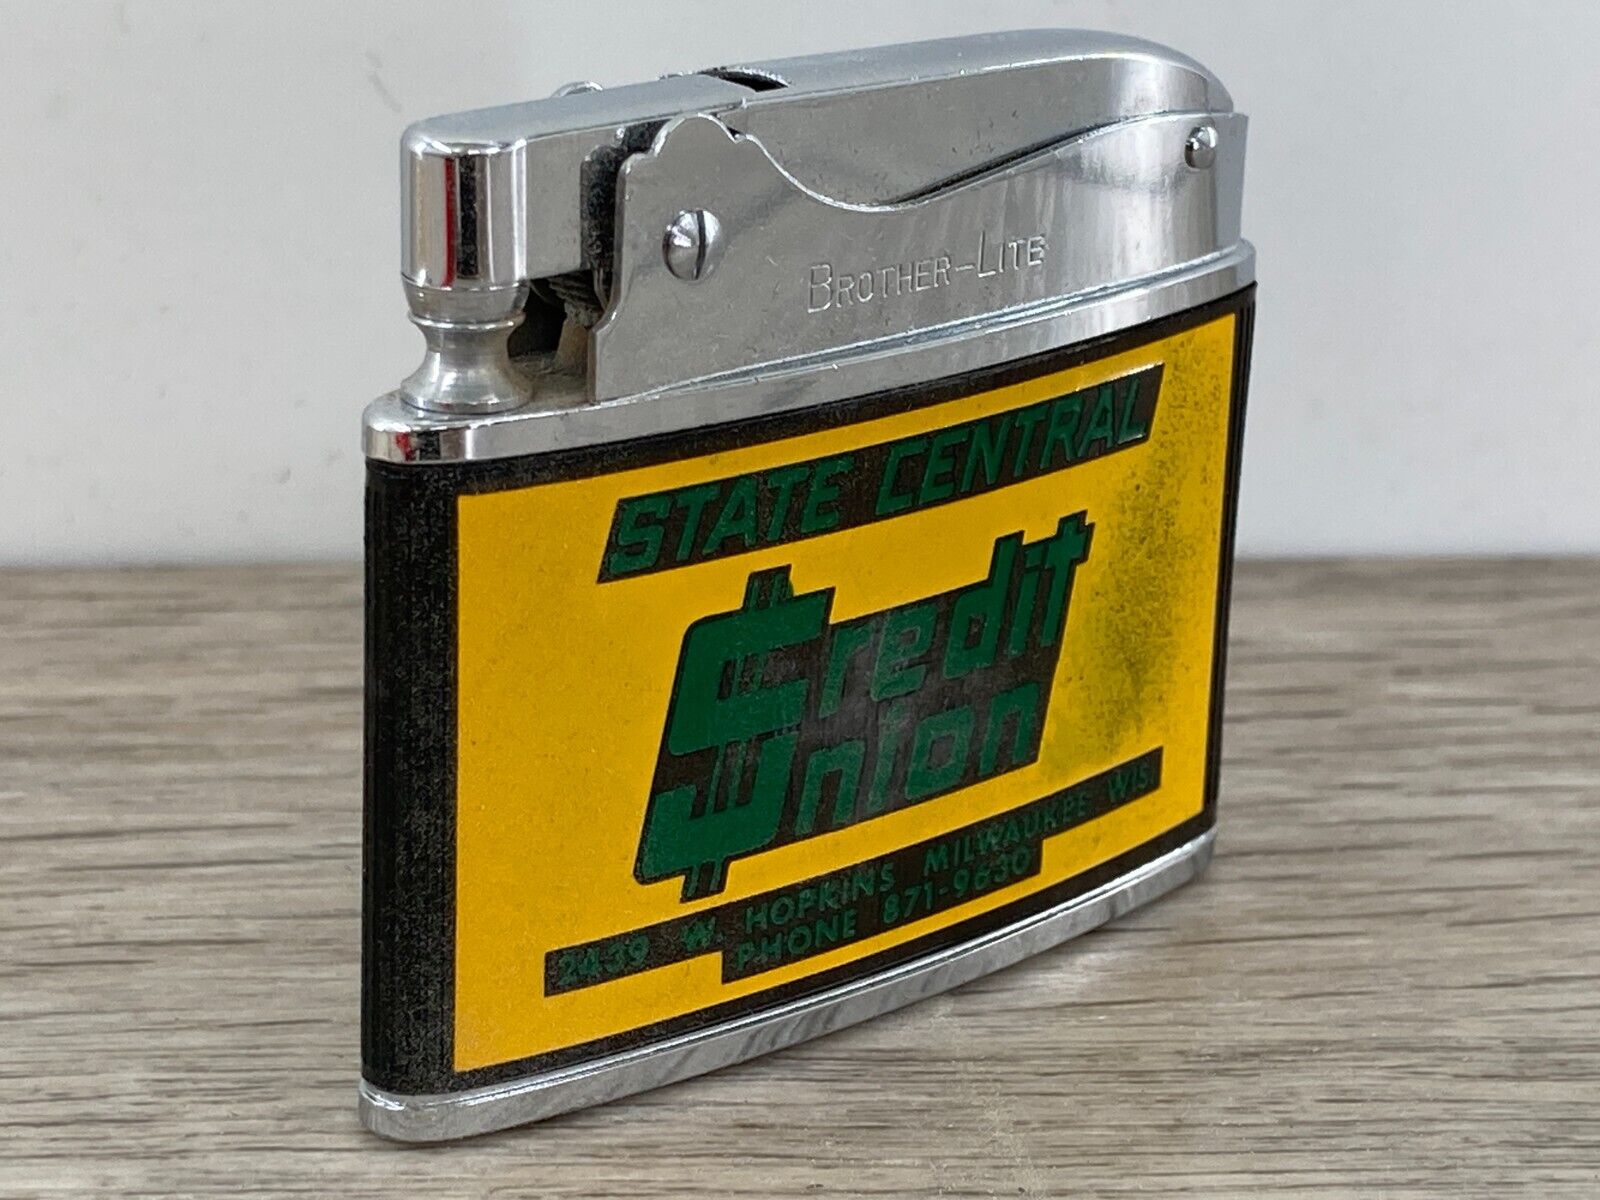 Brother Lite Automatic Super Lighter Milwaukee Wisconsin Bank Advertising Japan